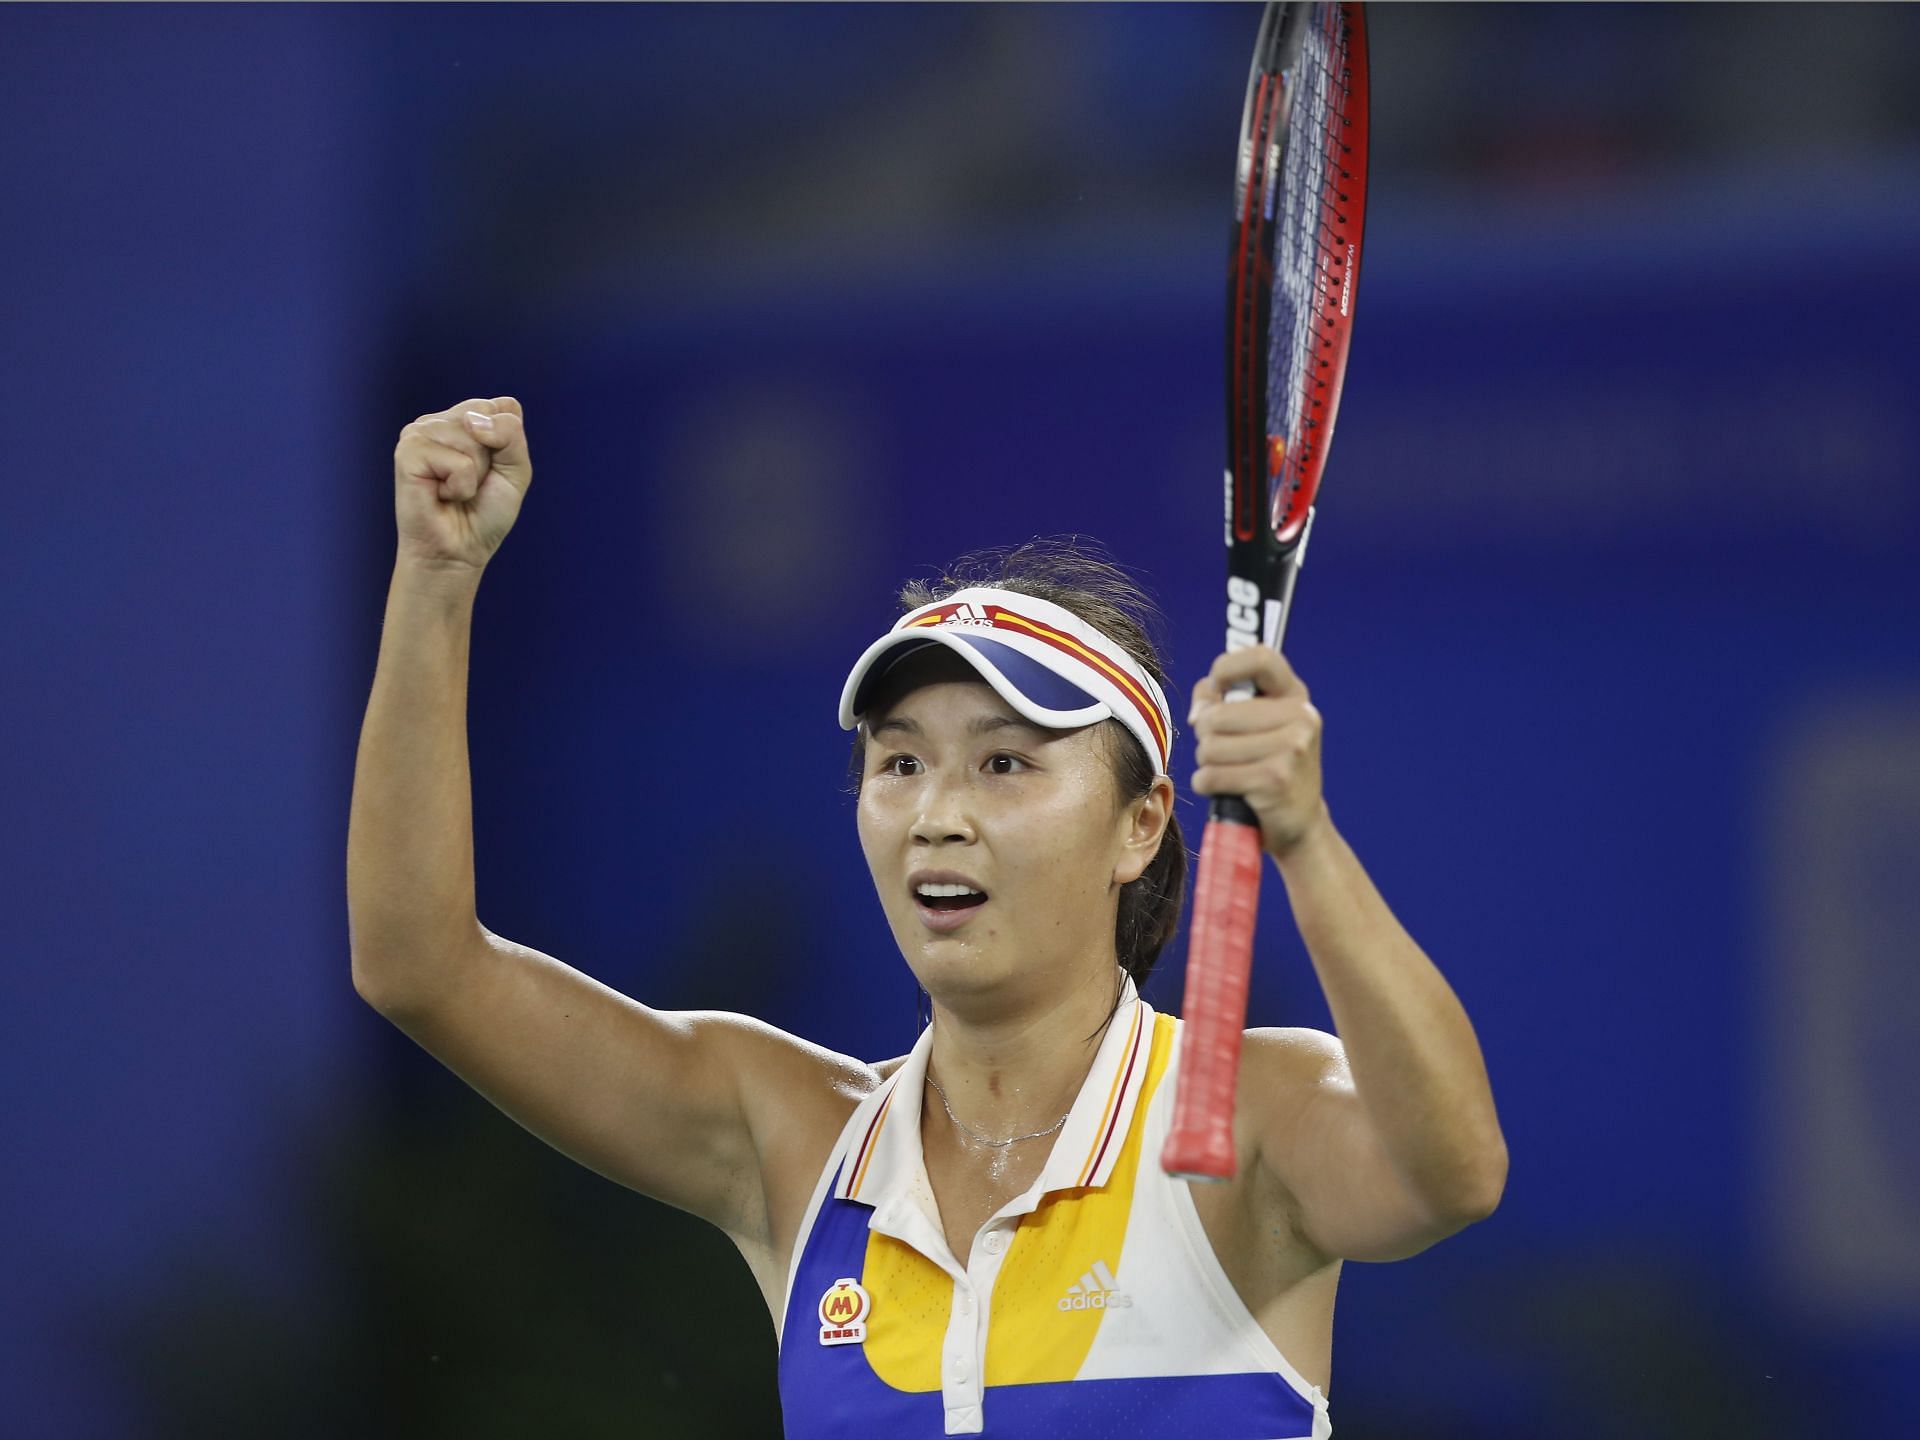 Photo evidence of Peng Shuai was finally received after days of demands from several world organizations